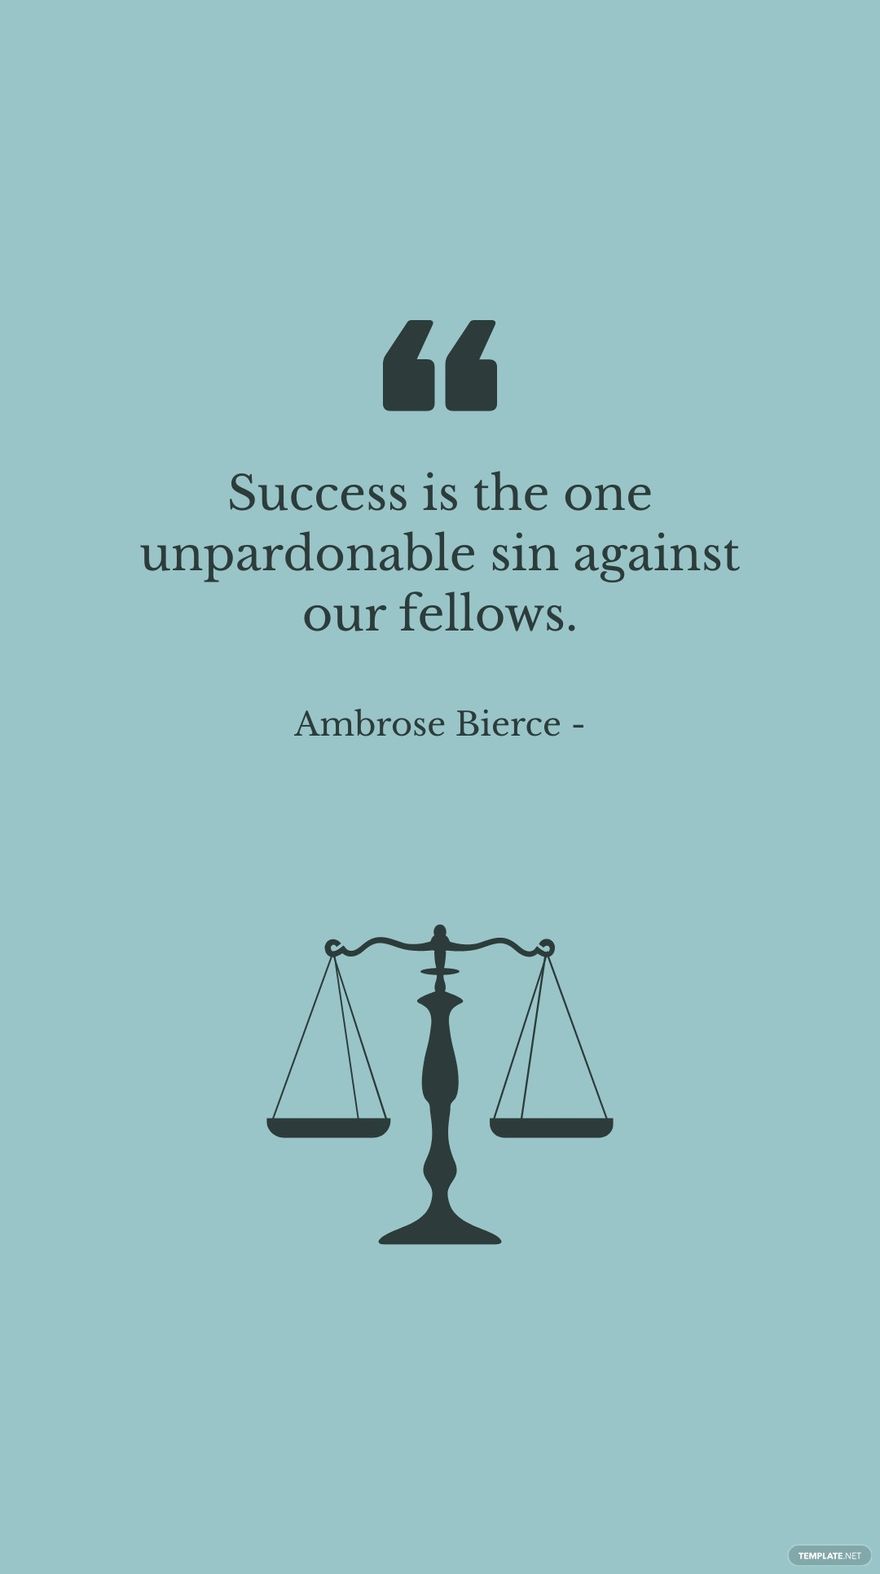 Ambrose Bierce - Success is the one unpardonable sin against our fellows.